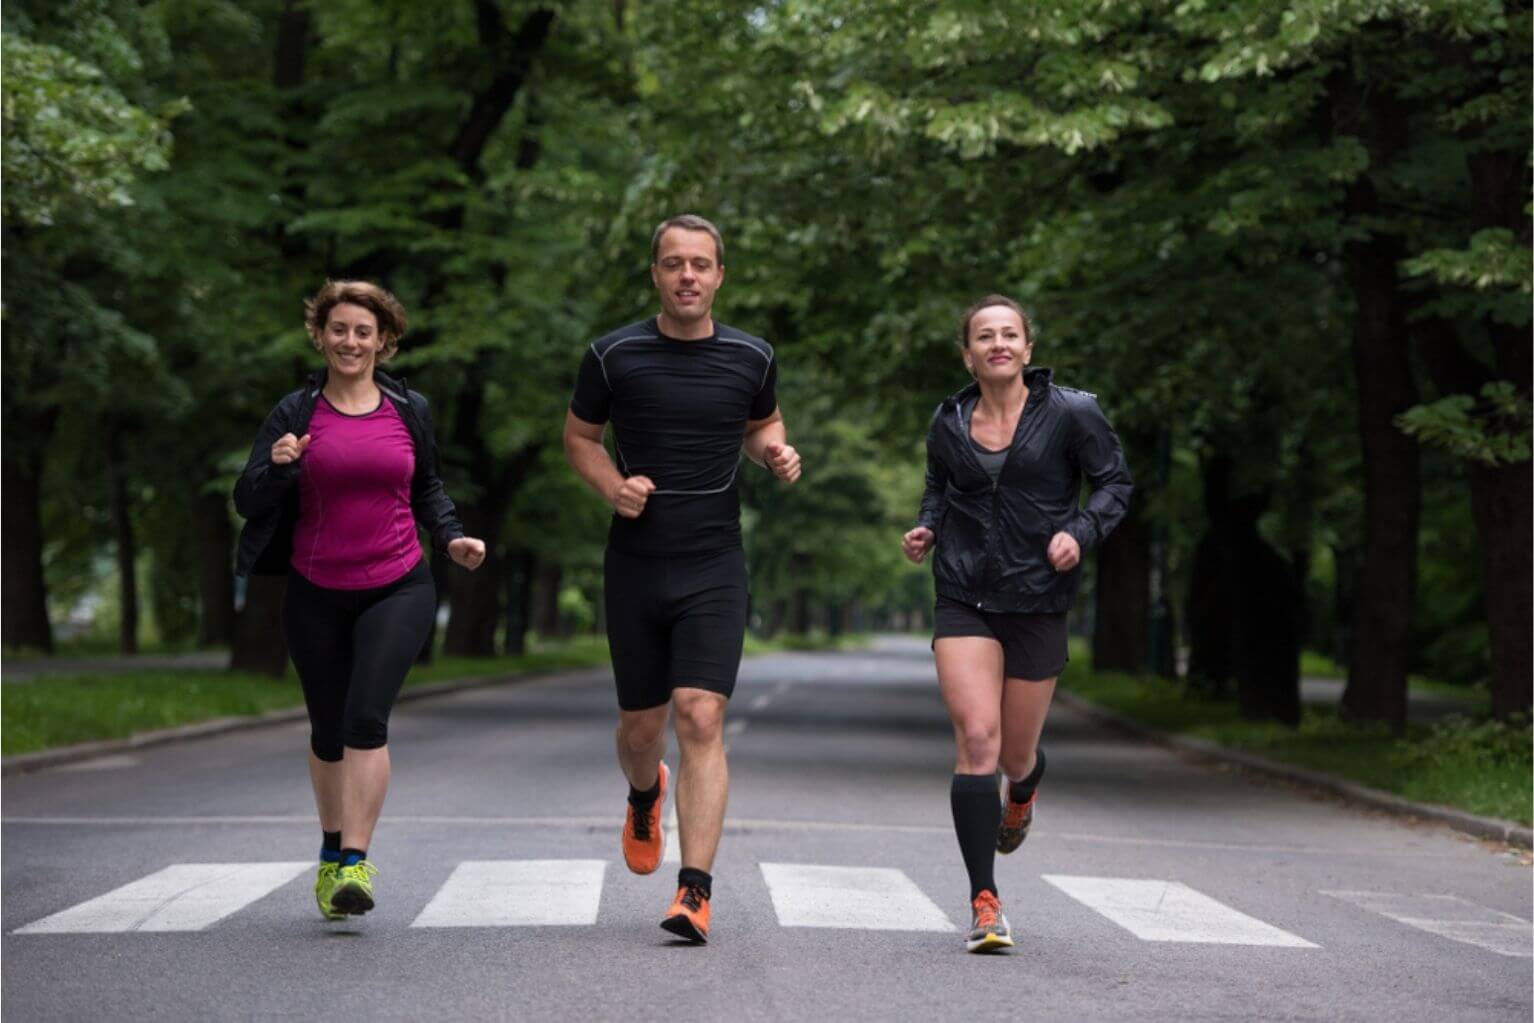 Three people running outside on a road next to trees.